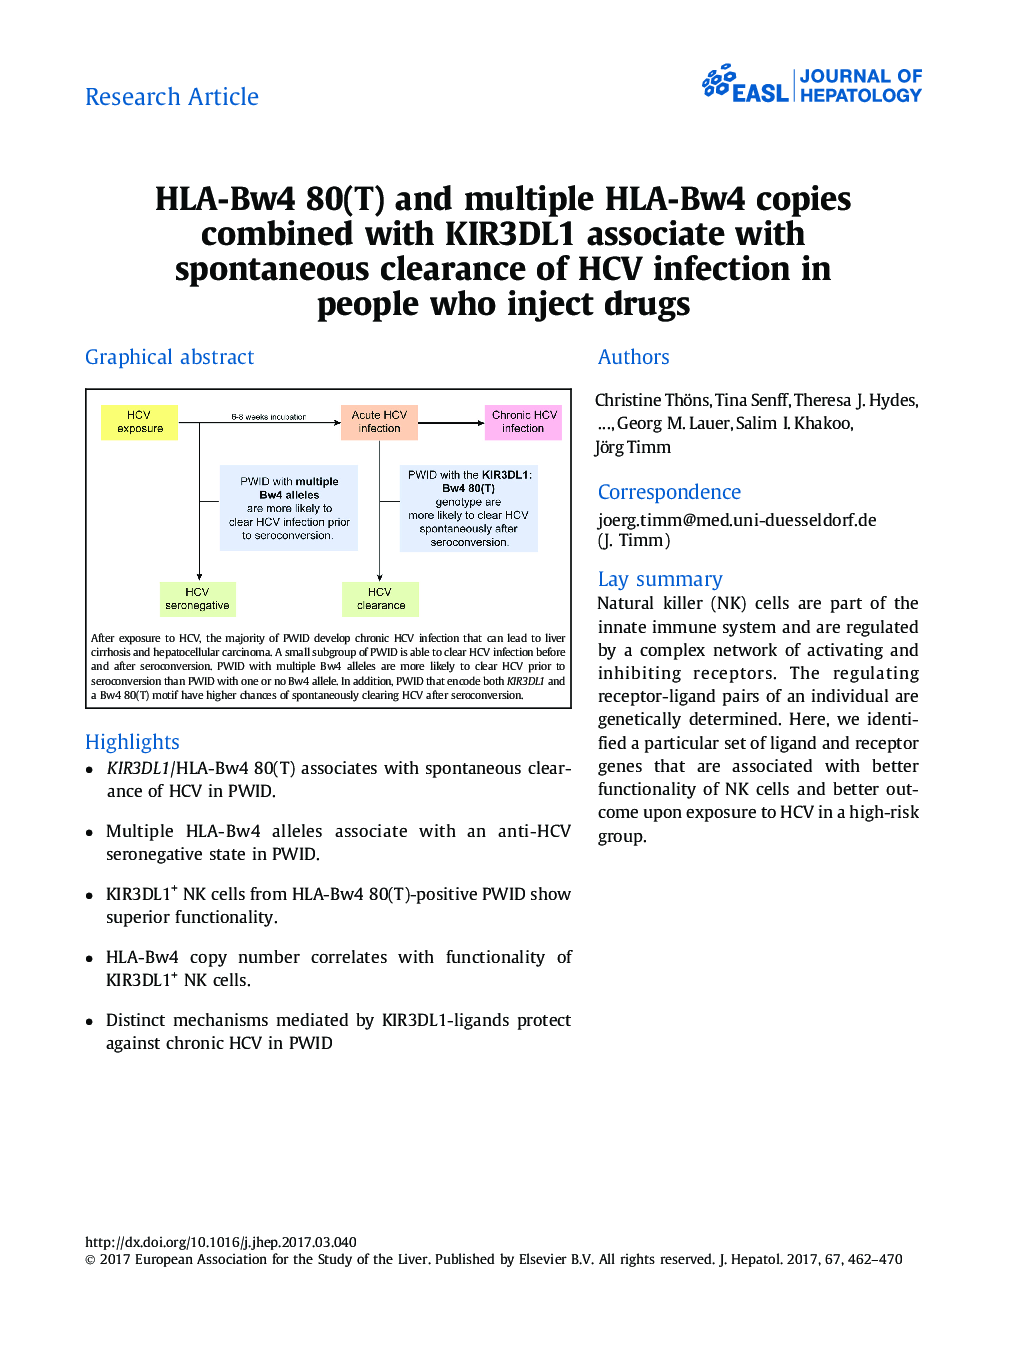 HLA-Bw4 80(T) and multiple HLA-Bw4 copies combined with KIR3DL1 associate with spontaneous clearance of HCV infection in people who inject drugs